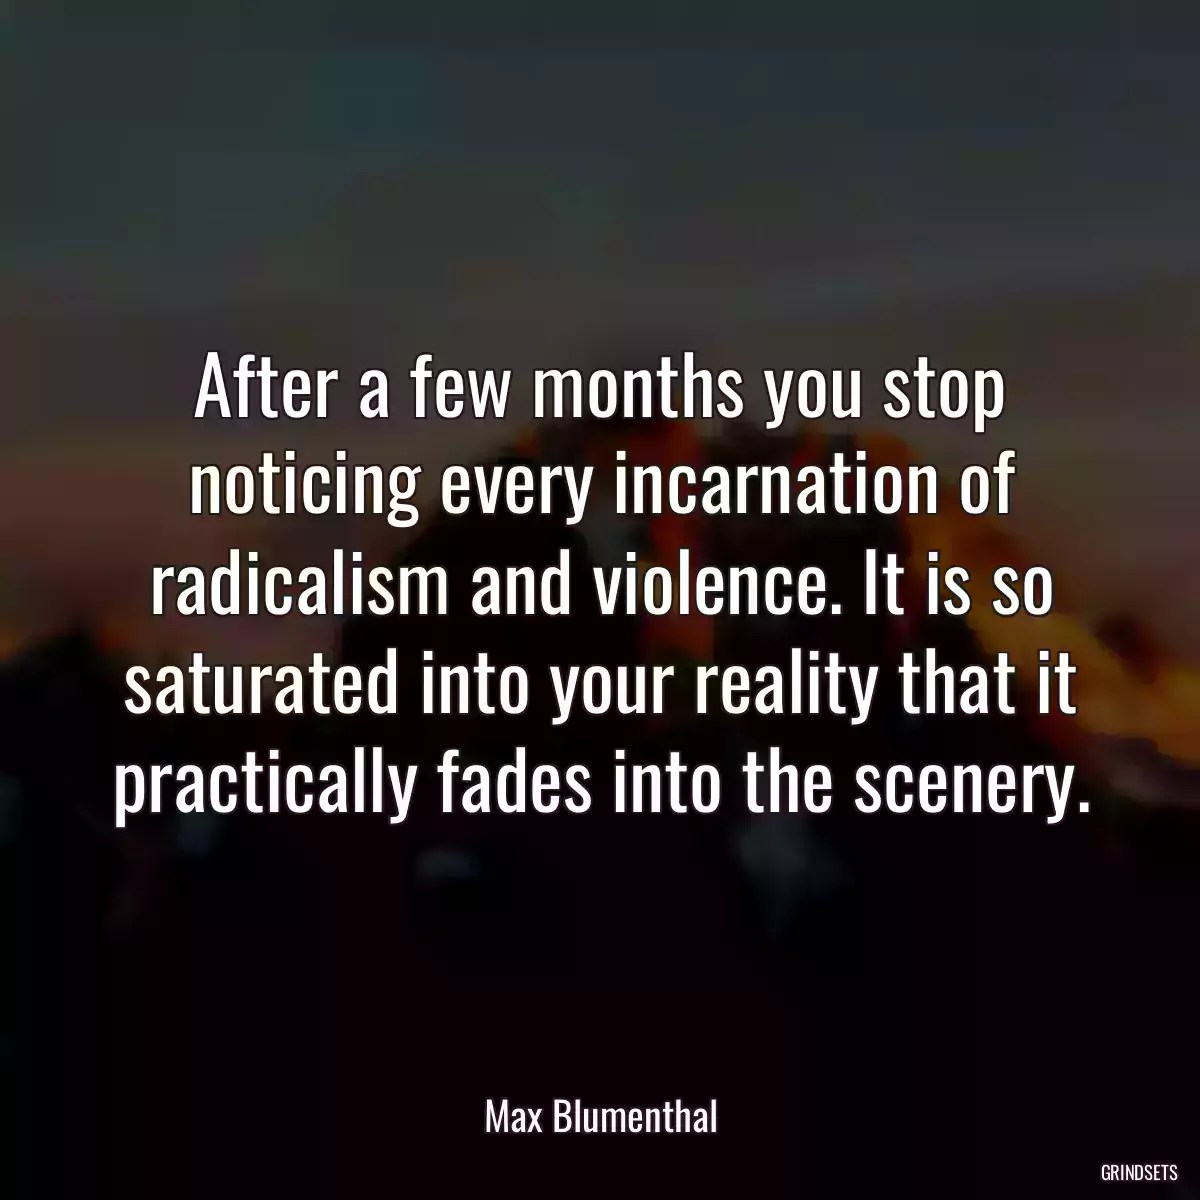 After a few months you stop noticing every incarnation of radicalism and violence. It is so saturated into your reality that it practically fades into the scenery.